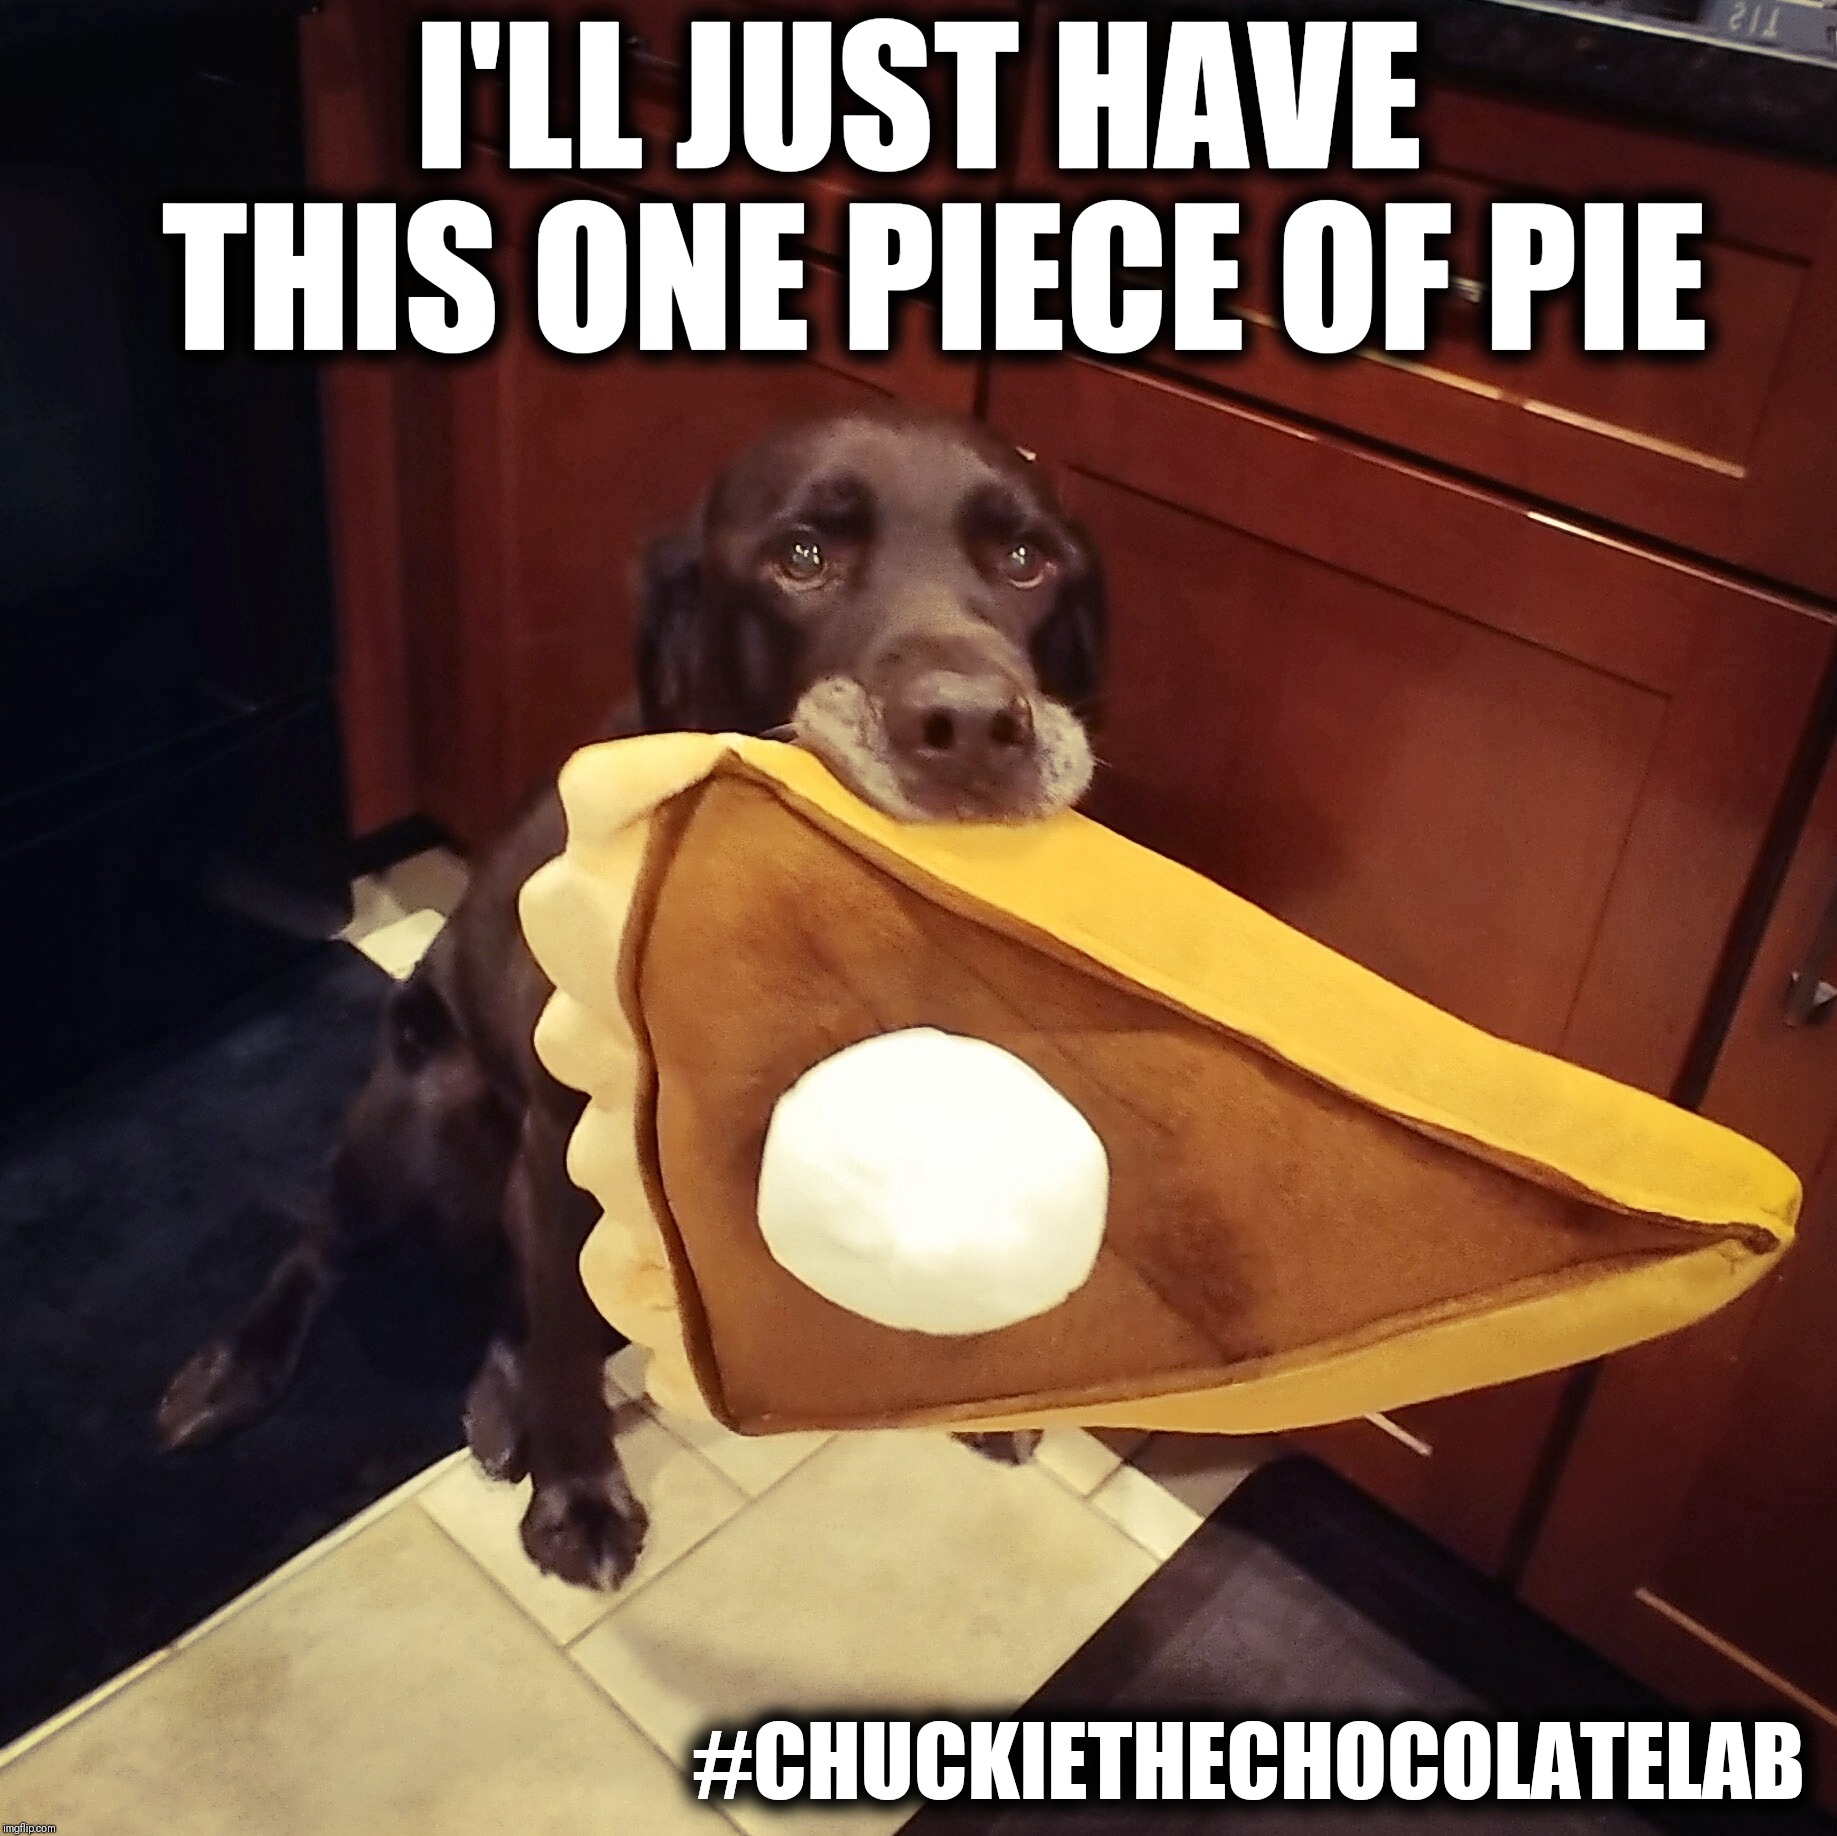 I'll just have this one piece of pie | I'LL JUST HAVE THIS ONE PIECE OF PIE; #CHUCKIETHECHOCOLATELAB | image tagged in chuckie the chocolate lab,dogs,pie,funny,memes,thanksgiving | made w/ Imgflip meme maker